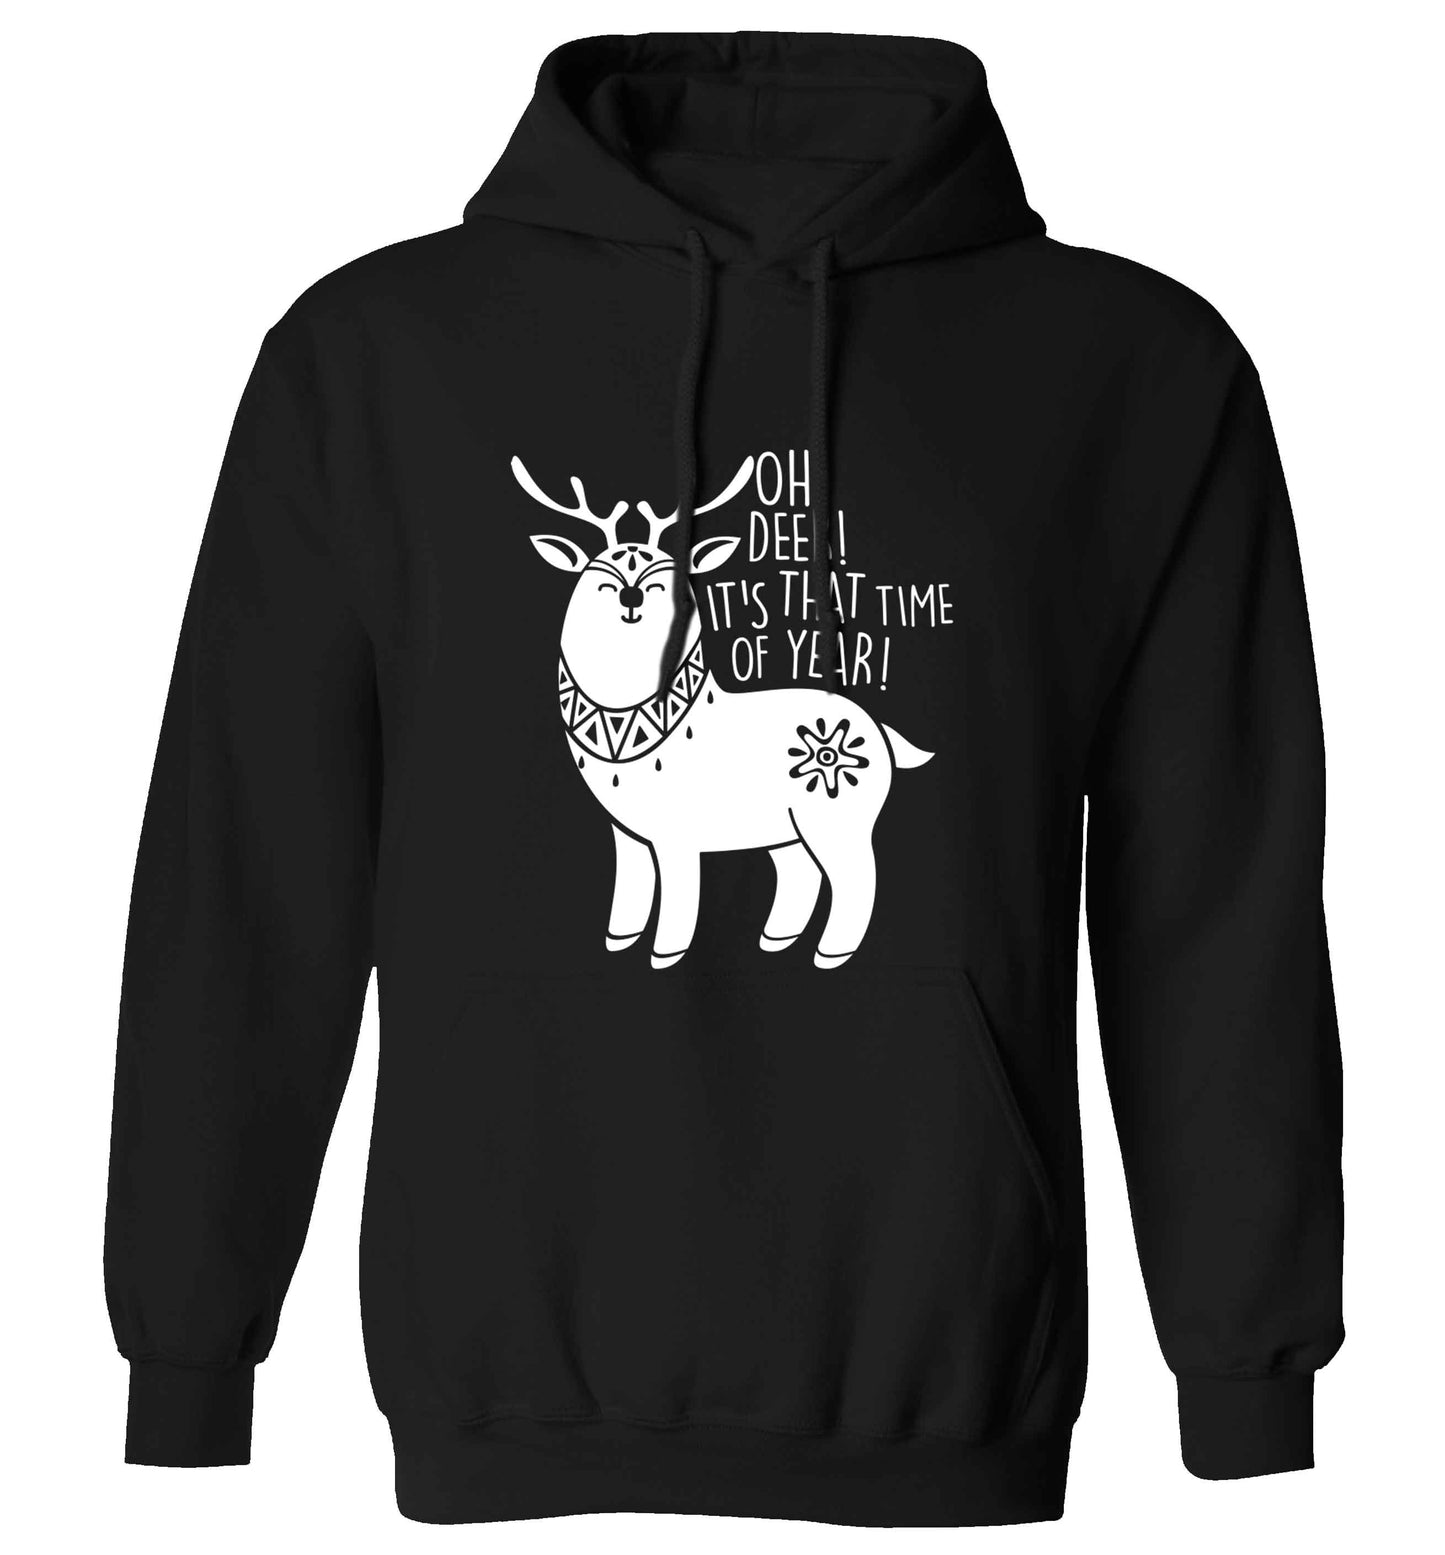 Oh dear it's that time of year adults unisex black hoodie 2XL